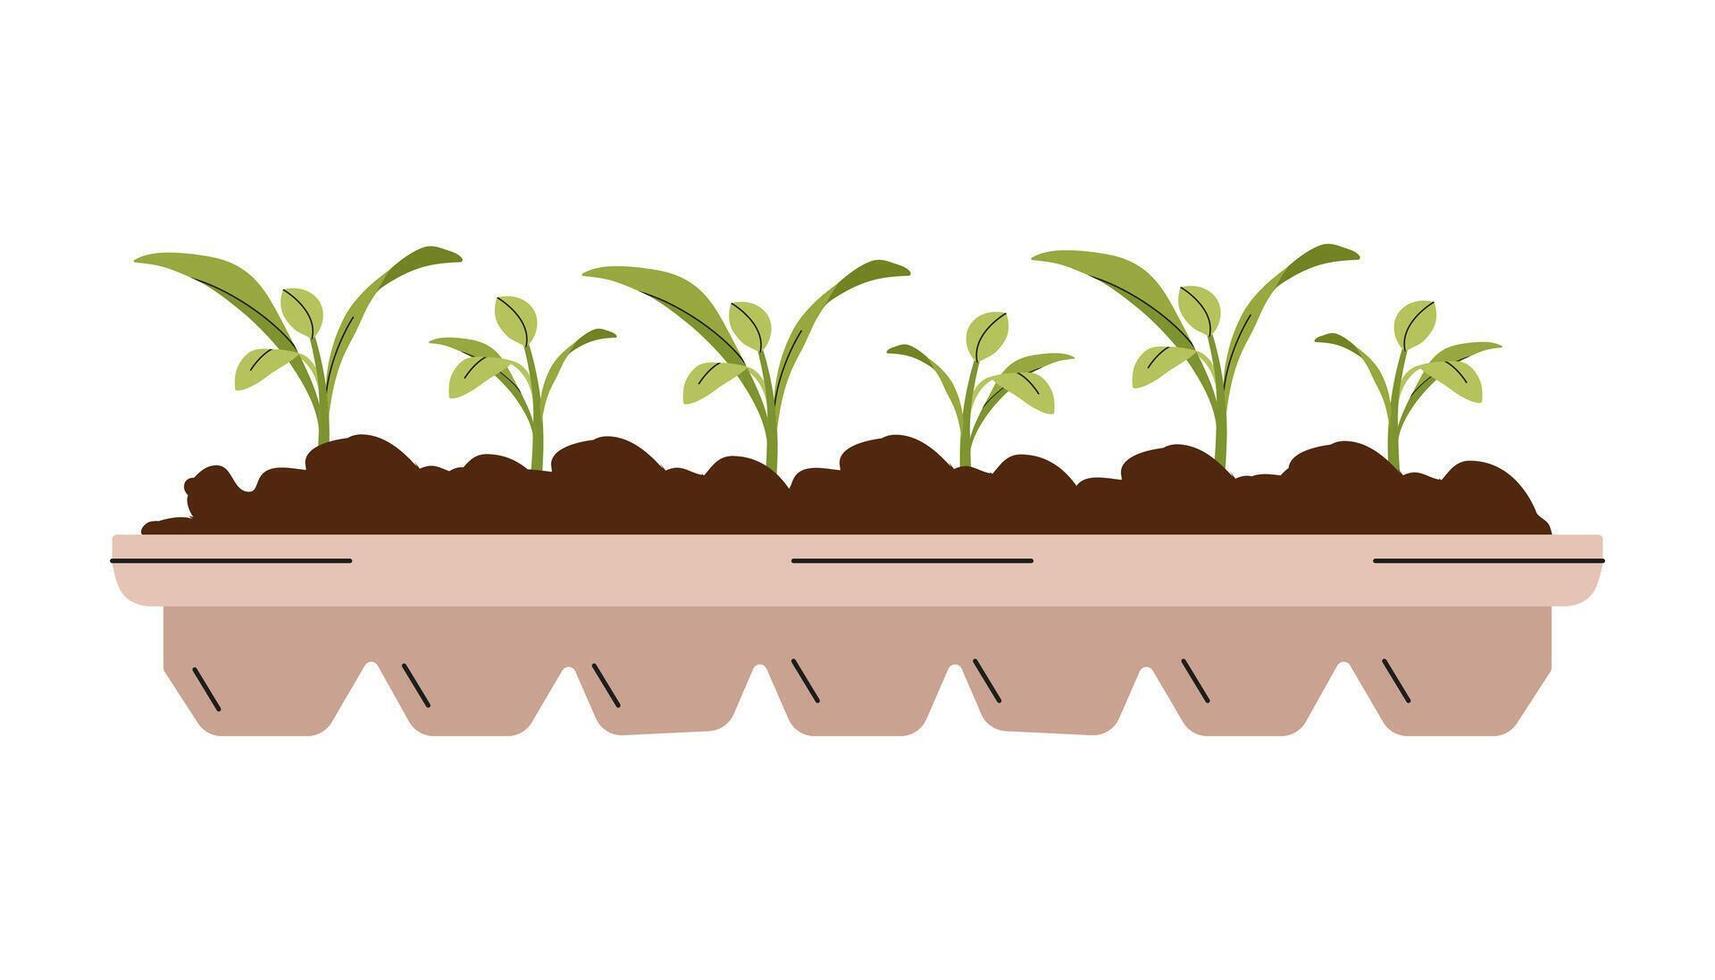 Vegetable seedlings growing at soil in pot. Green sprouts of plant. Gardening outdoor. Young seedling in ground. Caring for nature and ecology. Sustainable natural resources. Vector flat illustration.